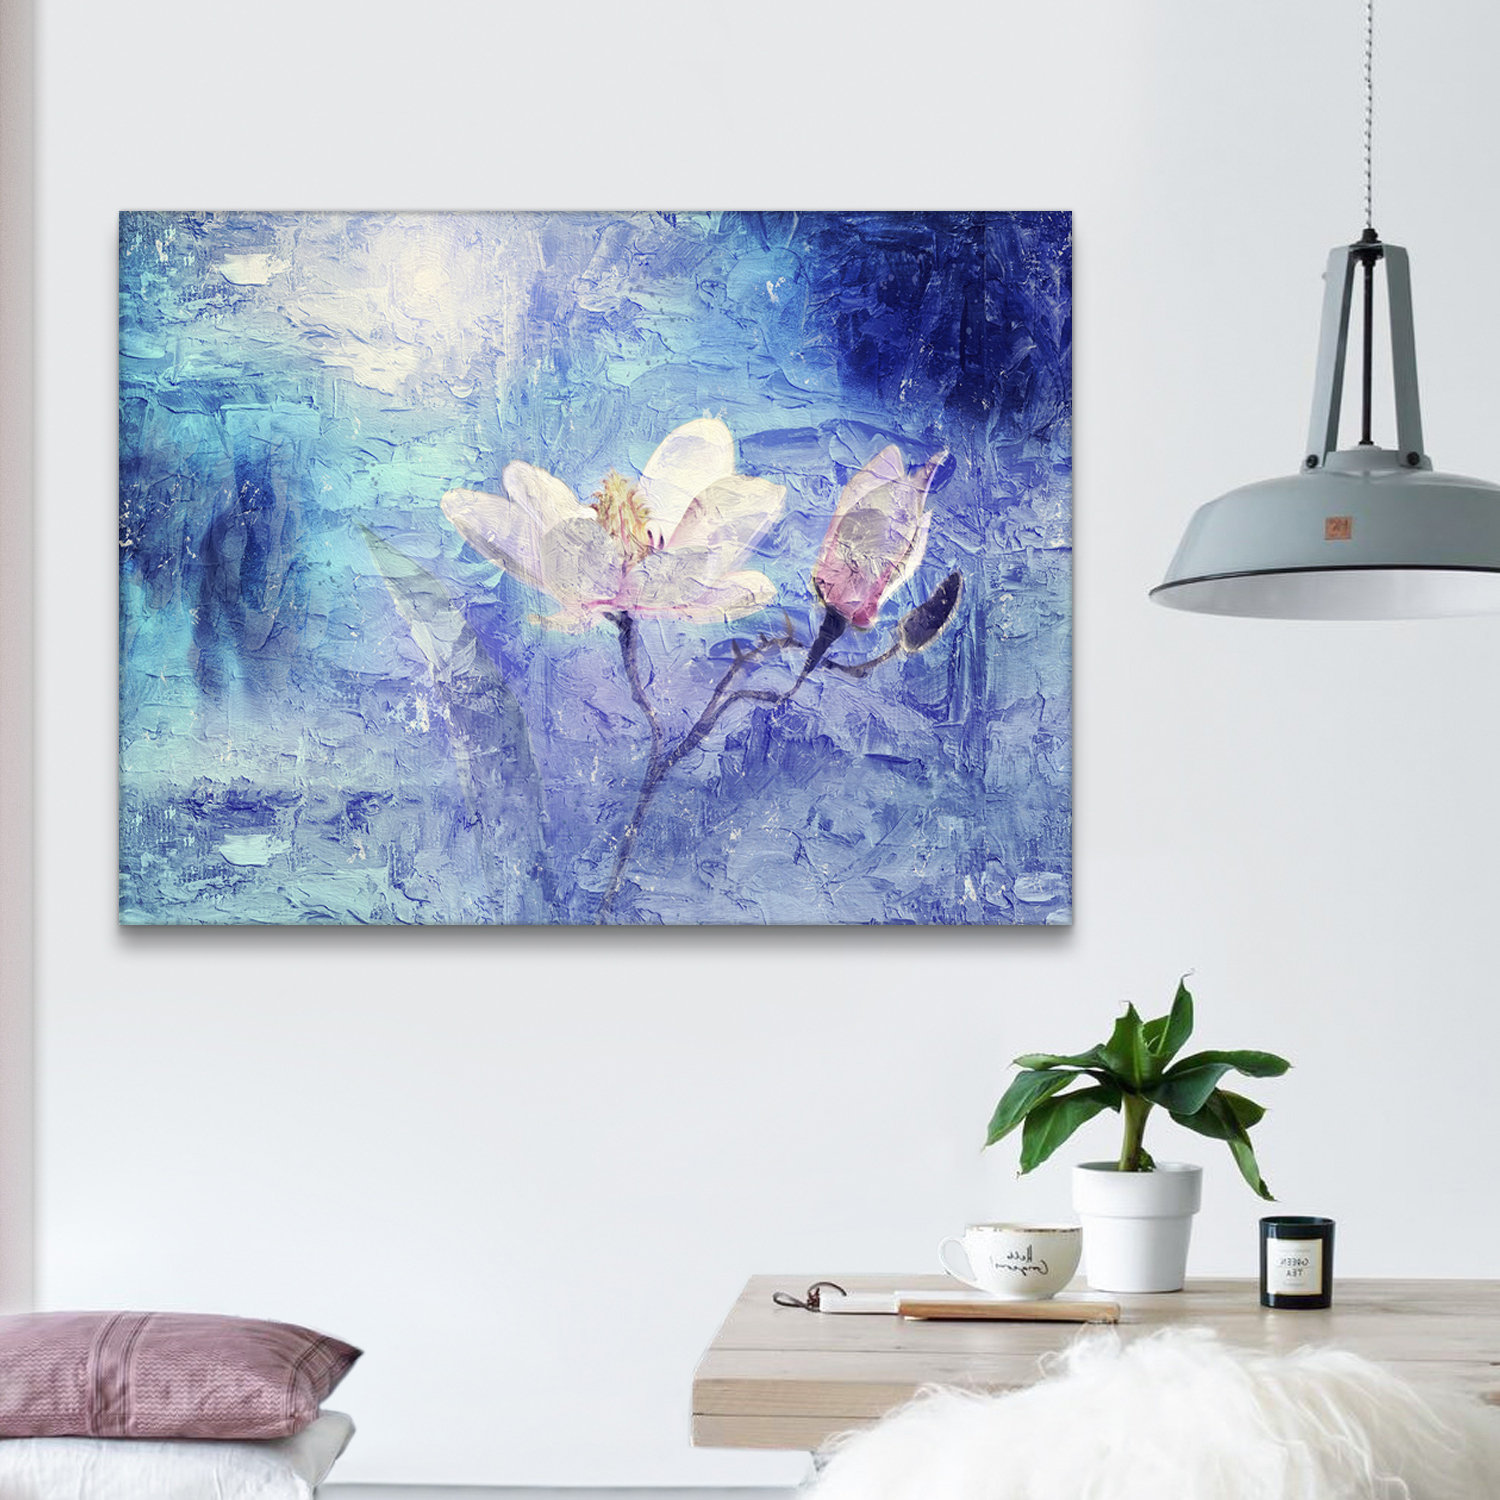 Framed Printed Canvas Wall Art Decor Abstract Impressionism Painting,Lotus Flower Watercolor Canvas Painting for Living Room, Bedroom Decor-Ready to H